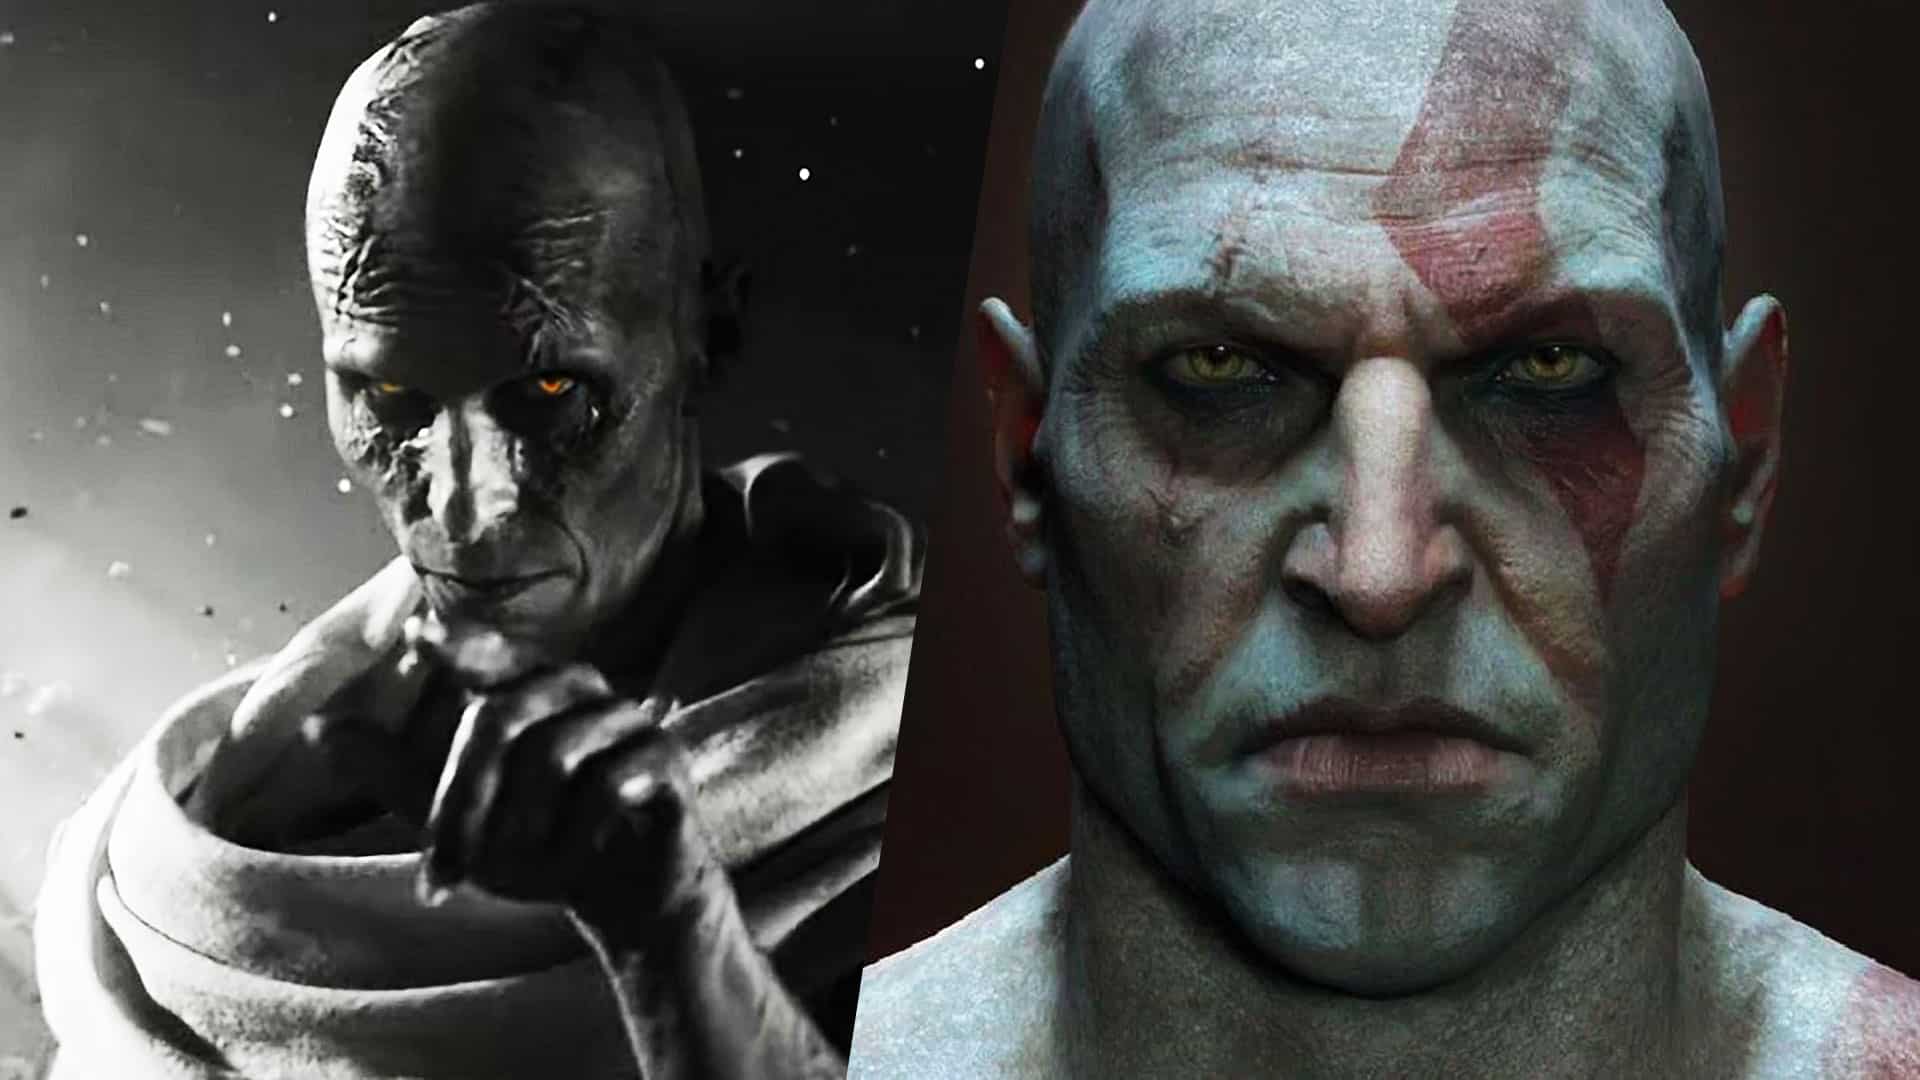 How God Of War's Thor Is Different From Marvel's